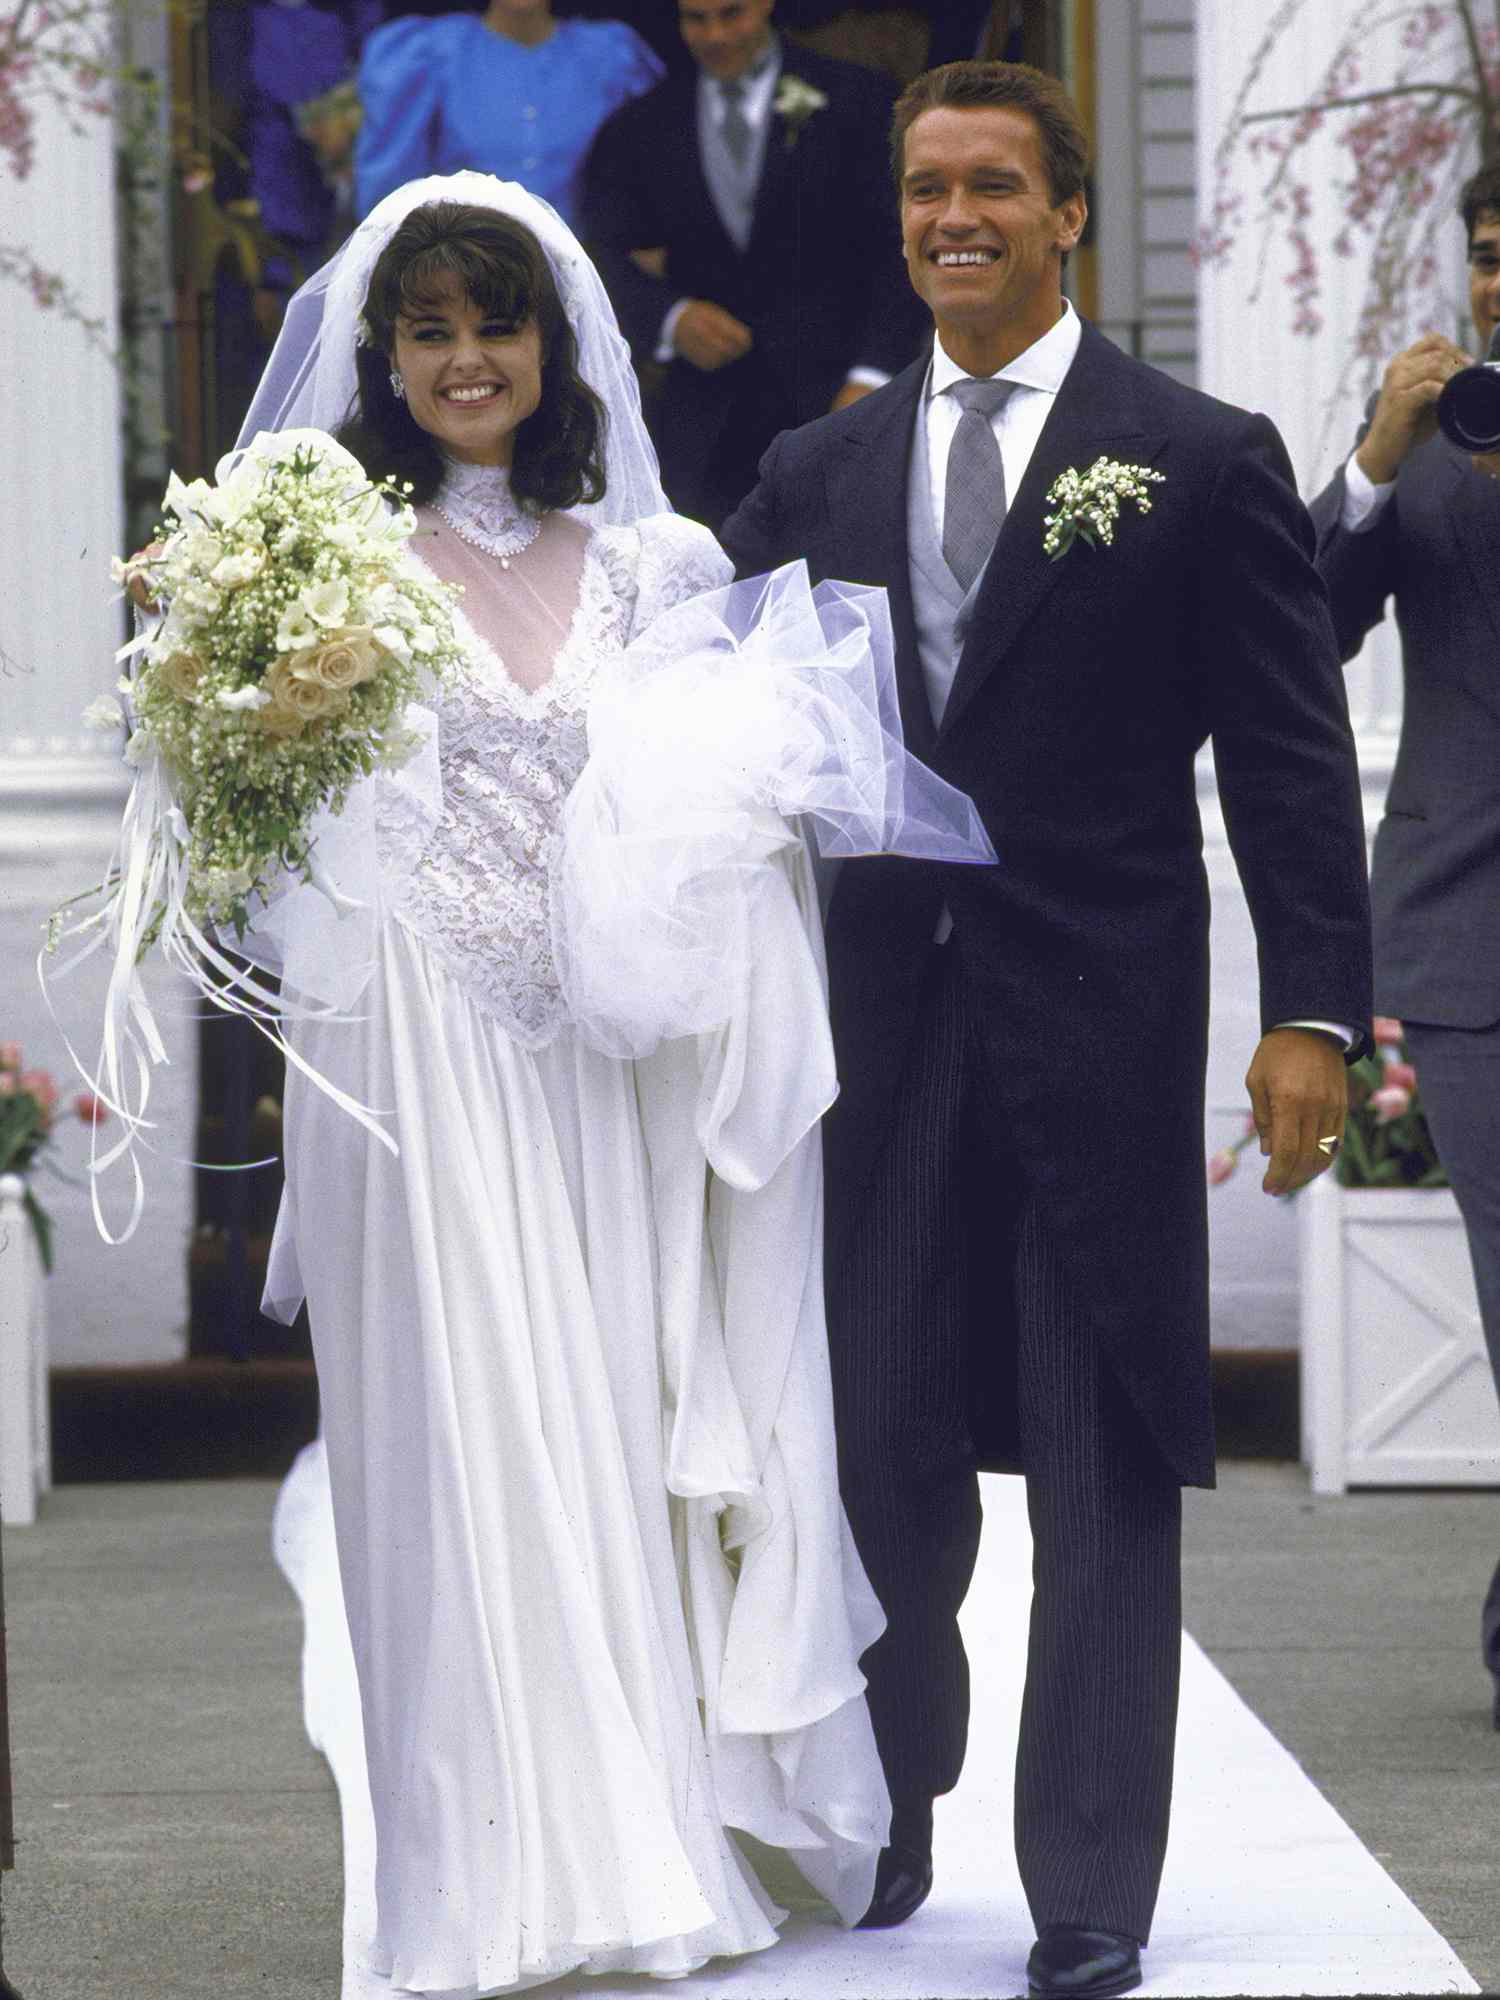 Arnold Schwarzenegger with his new wife Maria Shriver Schwarzenegger on their wedding day, standing in front of St. Francis Xaviers Church